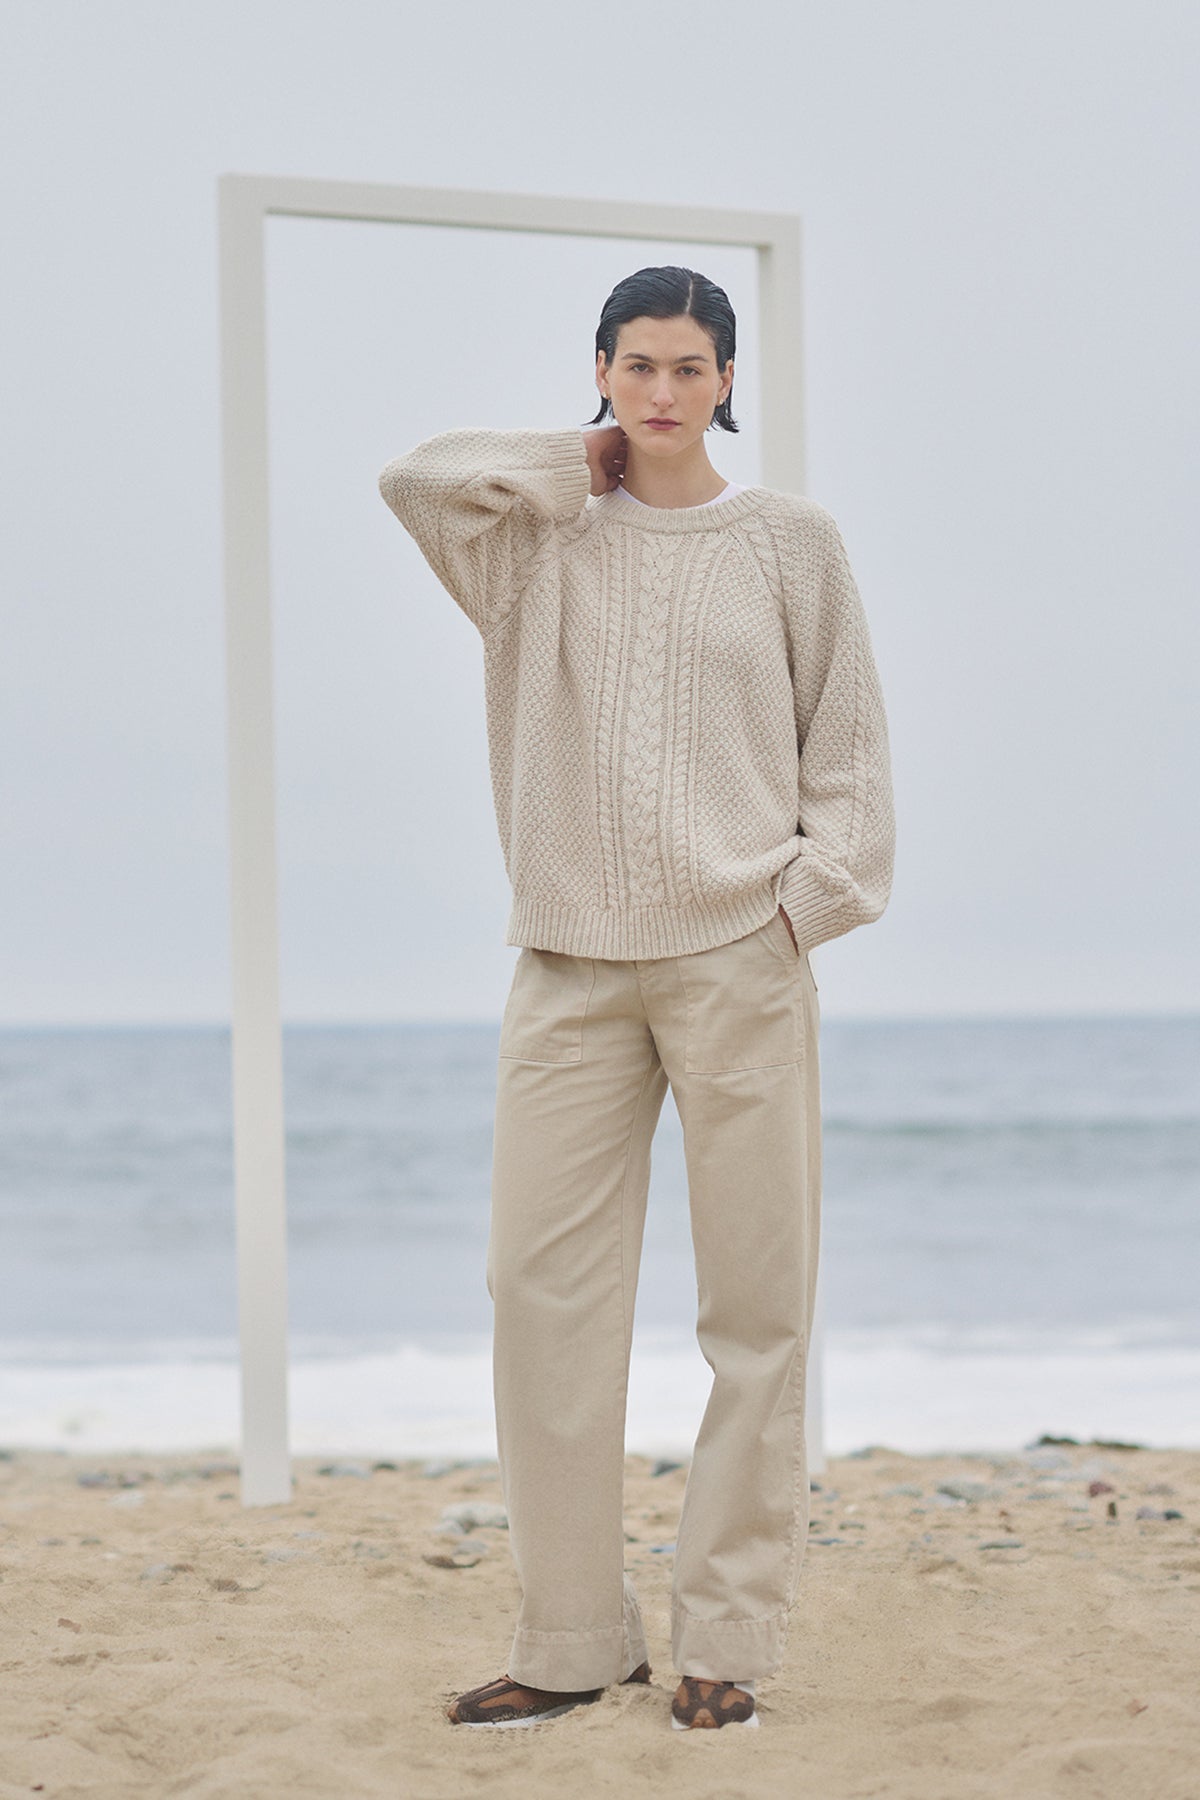 A woman standing on the beach wearing a HERMOSA SWEATER by Velvet by Jenny Graham.-35547792376001